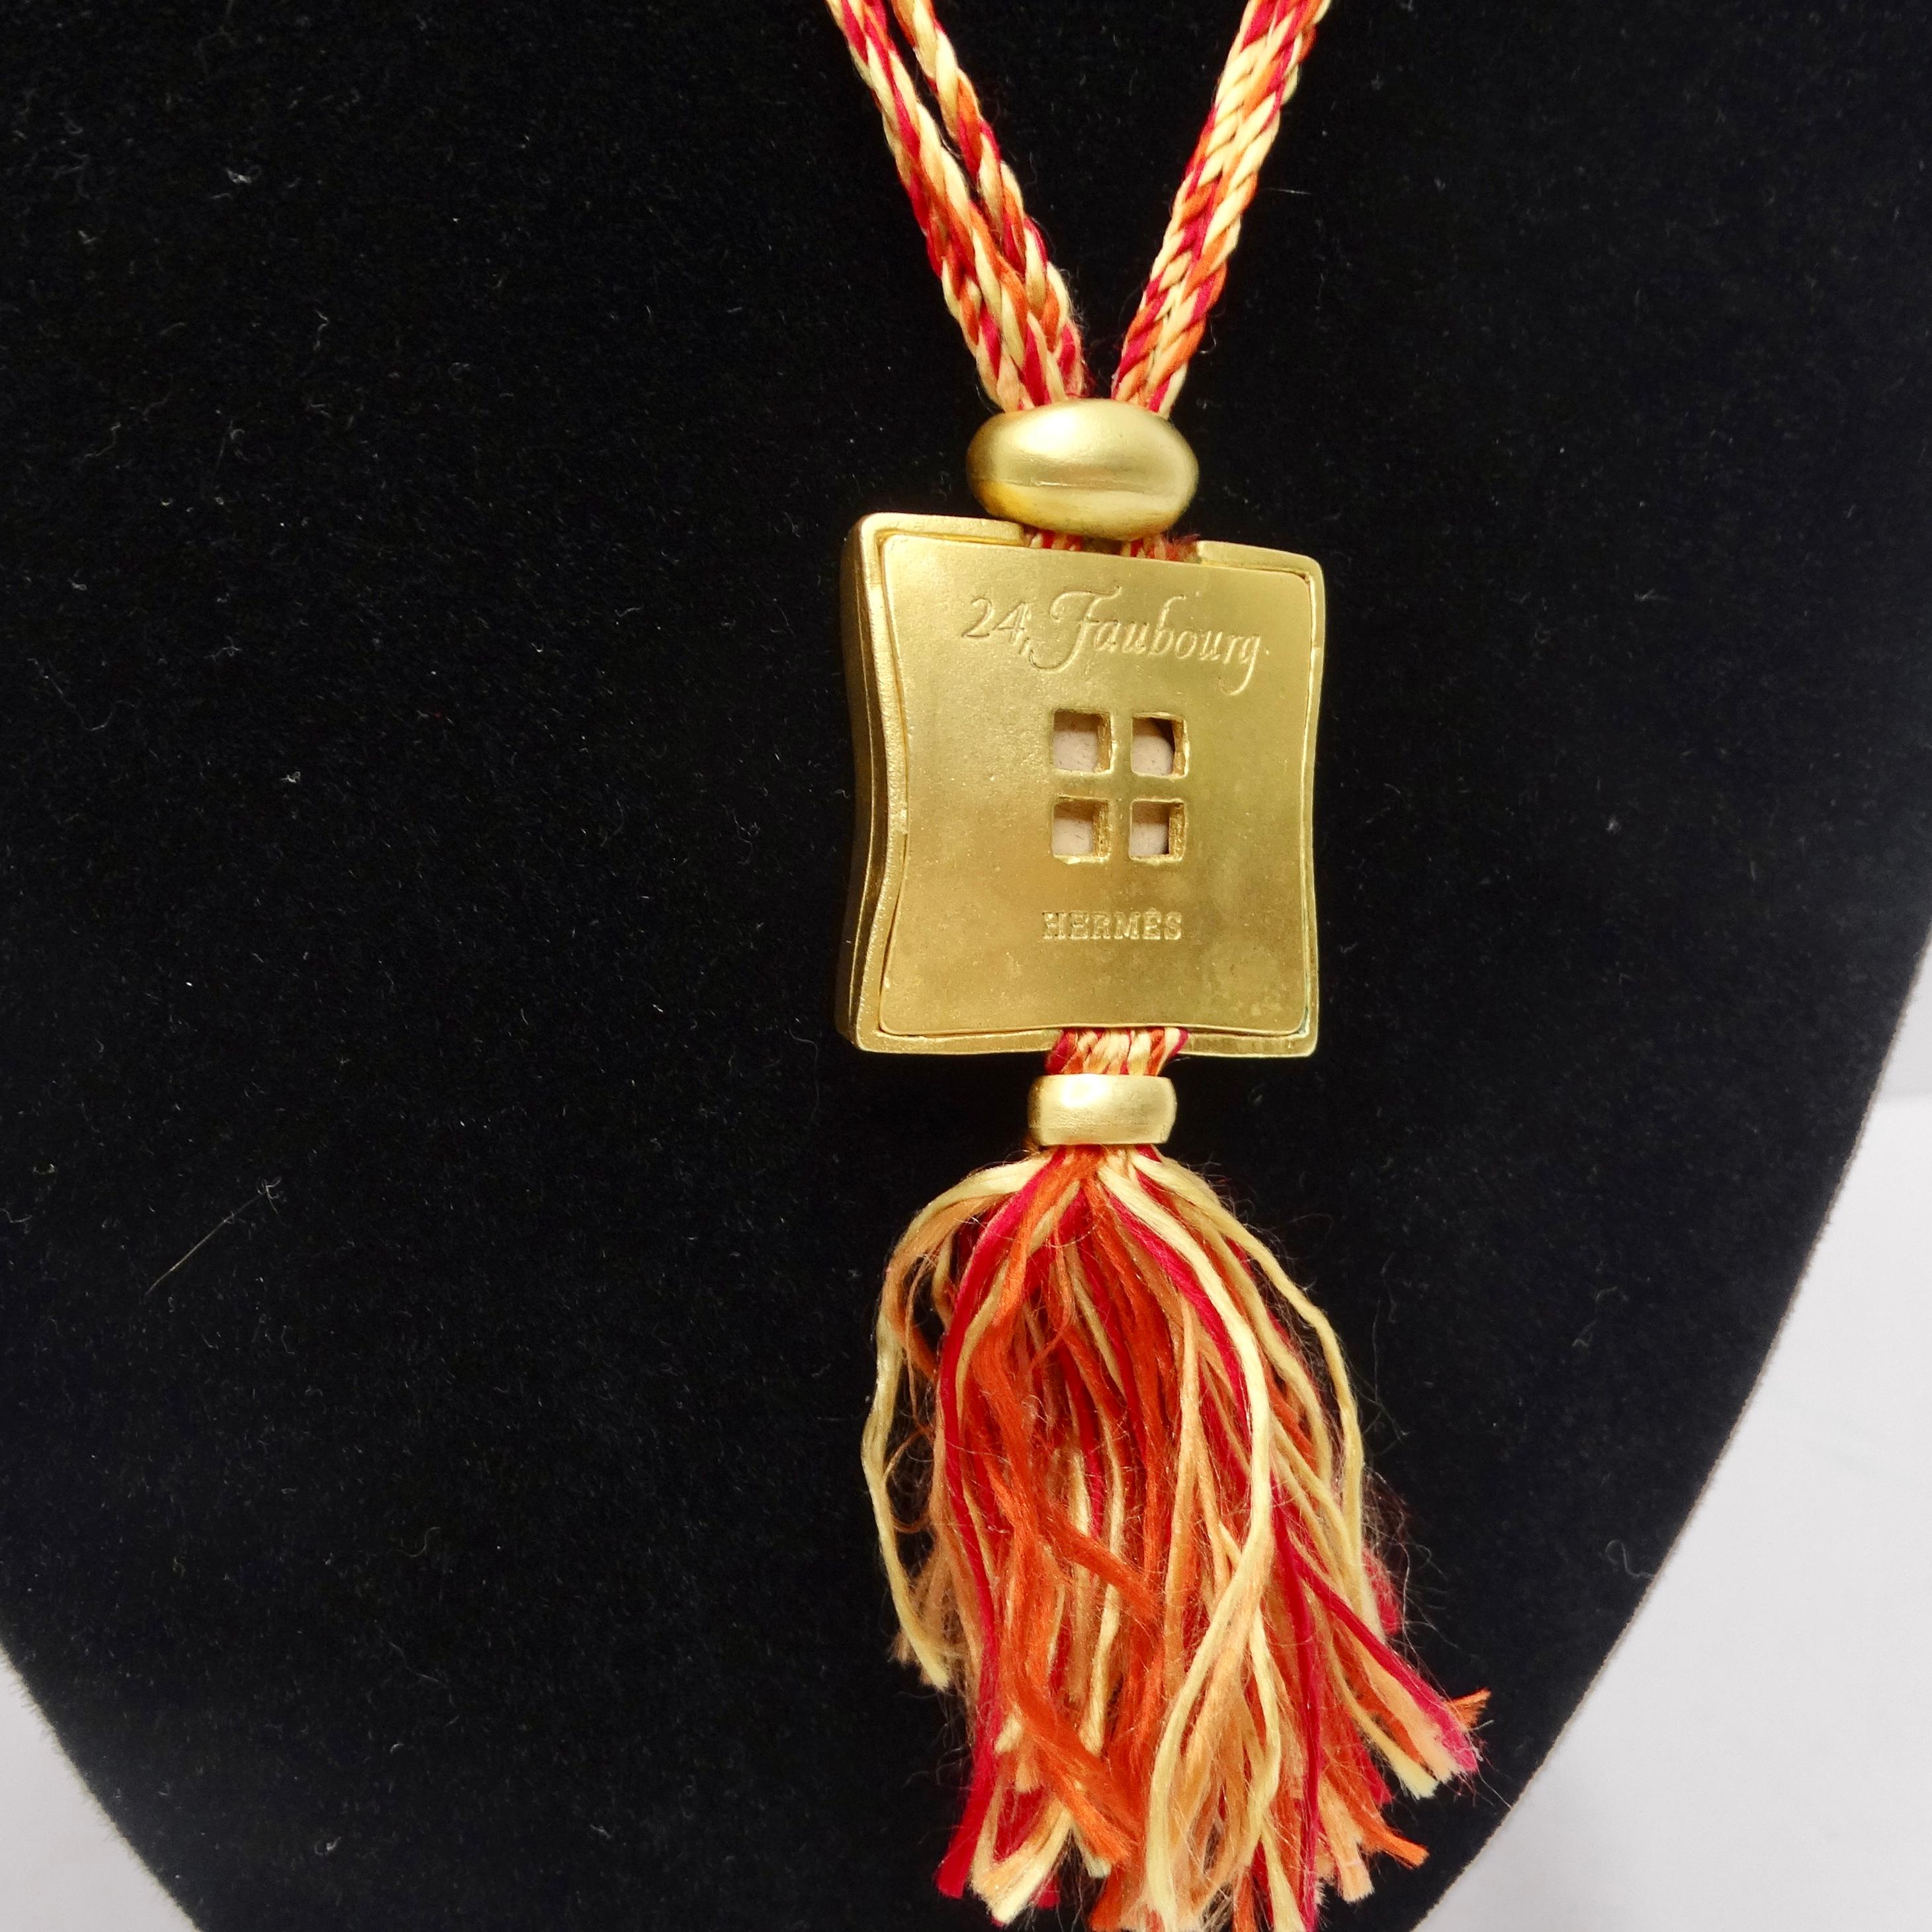 Hermes Gold Tone Pendent on Silk Yarn Chord Necklace In Good Condition For Sale In Scottsdale, AZ